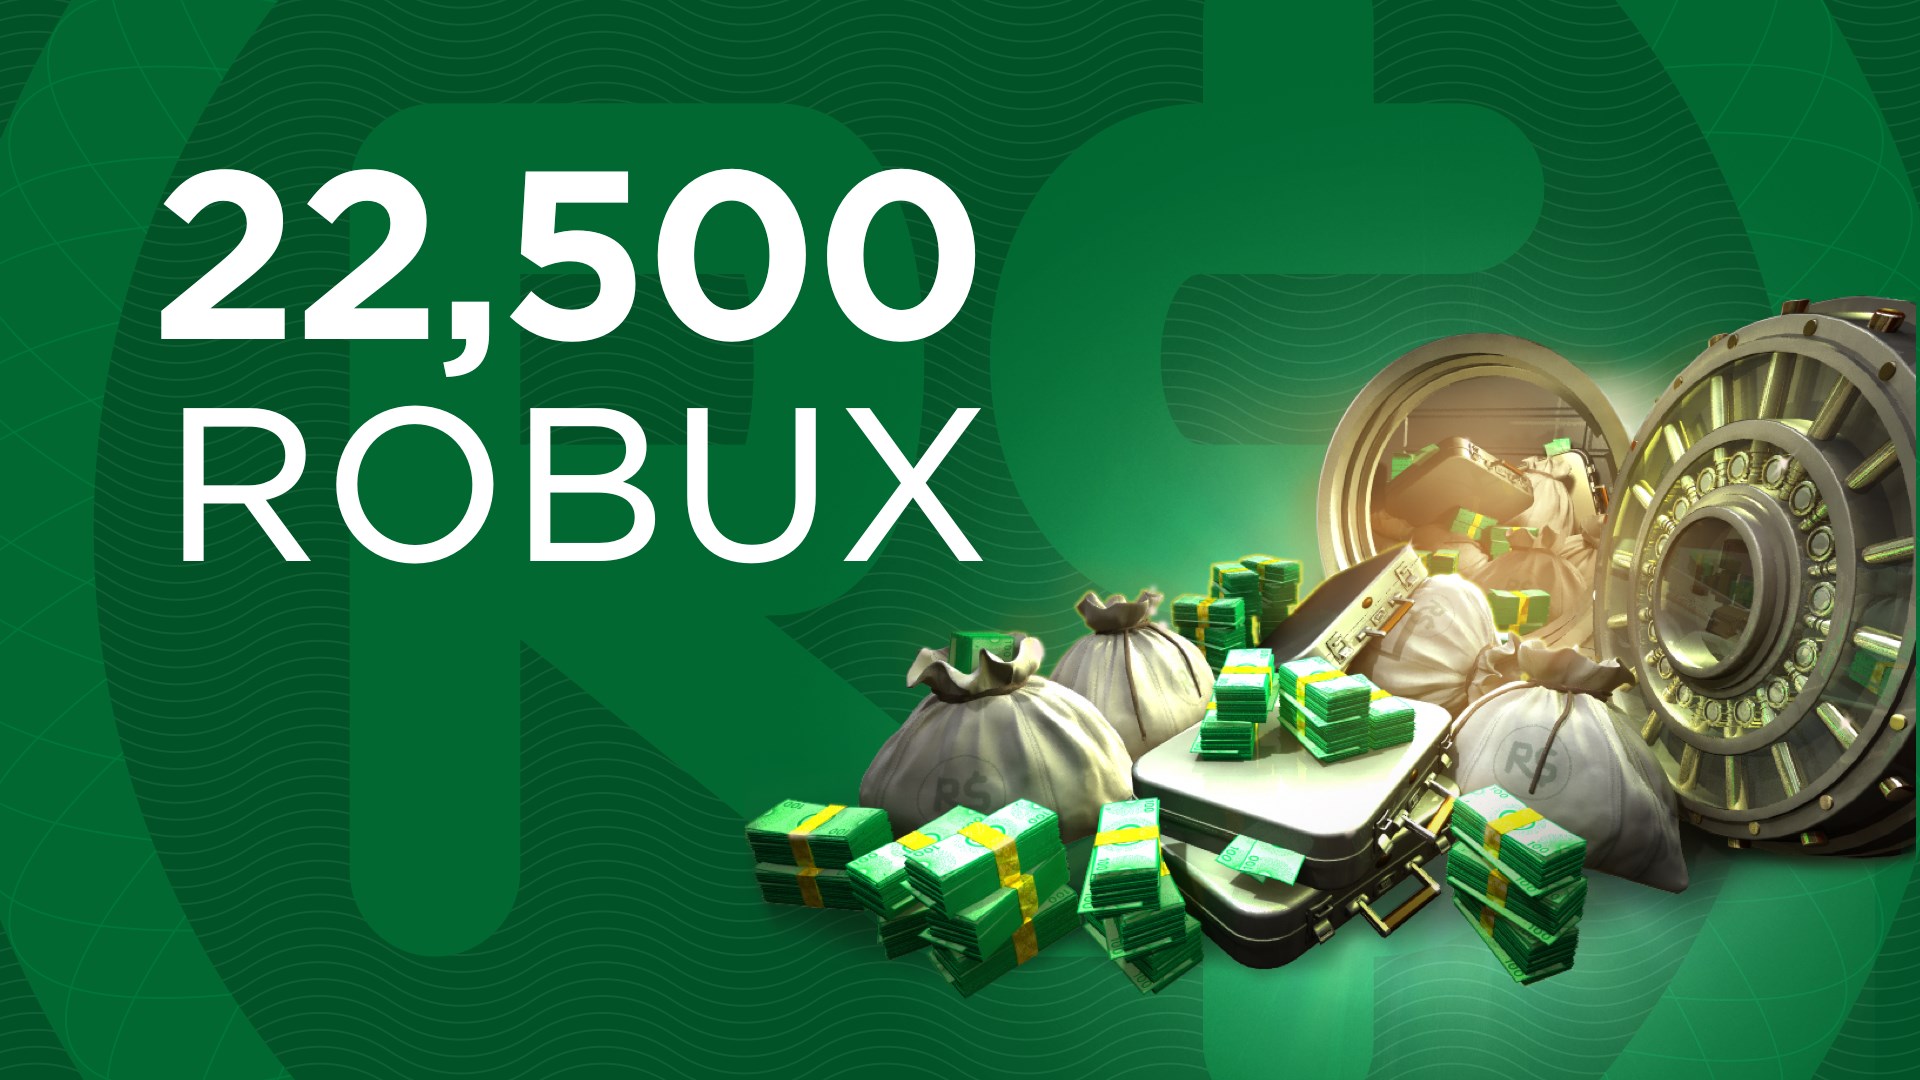 29000 Robux To Us Dollars Easy Anti Cheat Fortnite Aimbot - install roblox microsoft store rxgate cf and withdraw